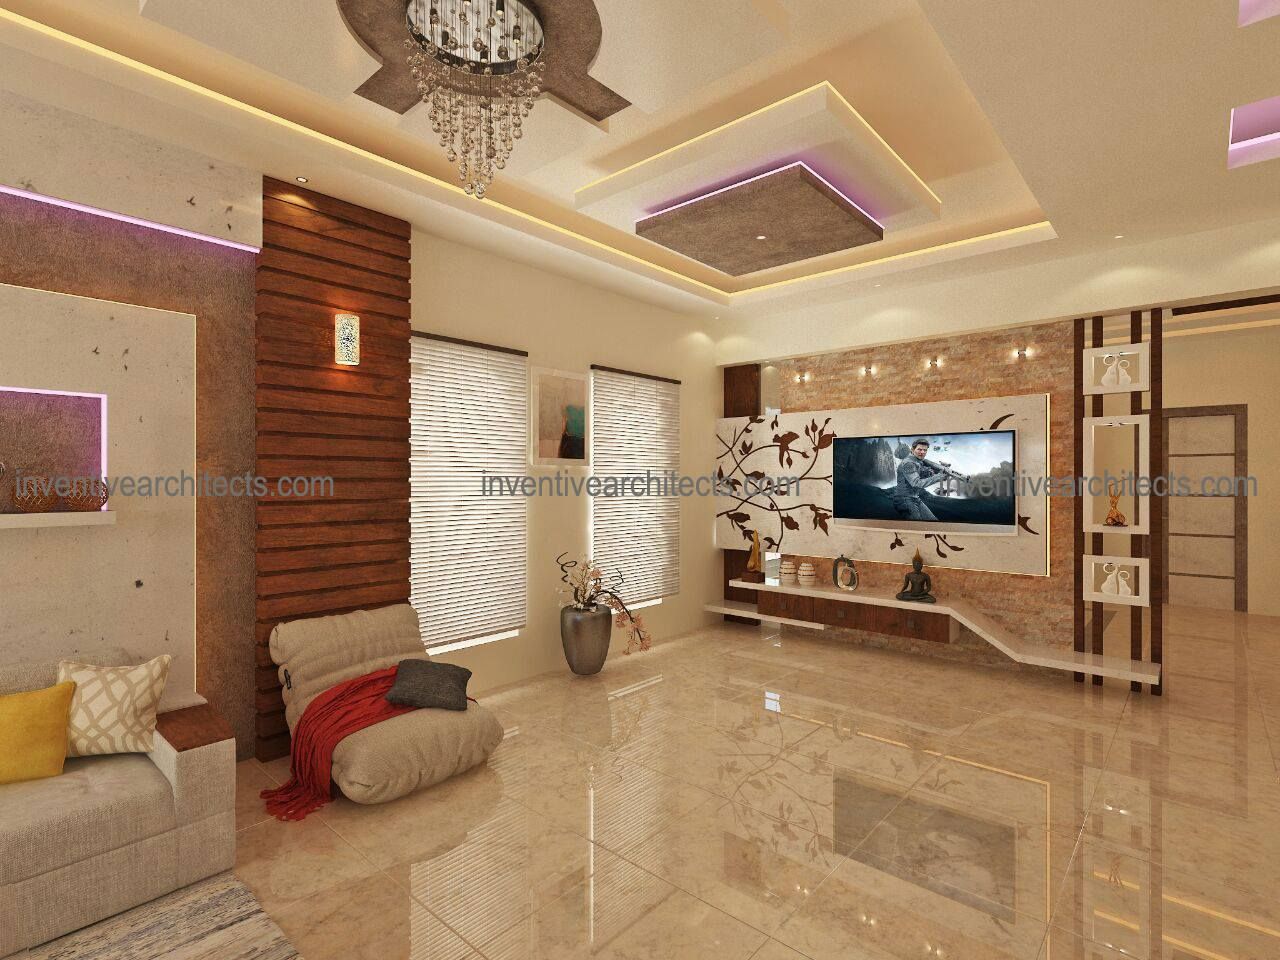 A Modern and Sophisticated Interior Project, Inventivearchitects Inventivearchitects Ruang Keluarga Modern